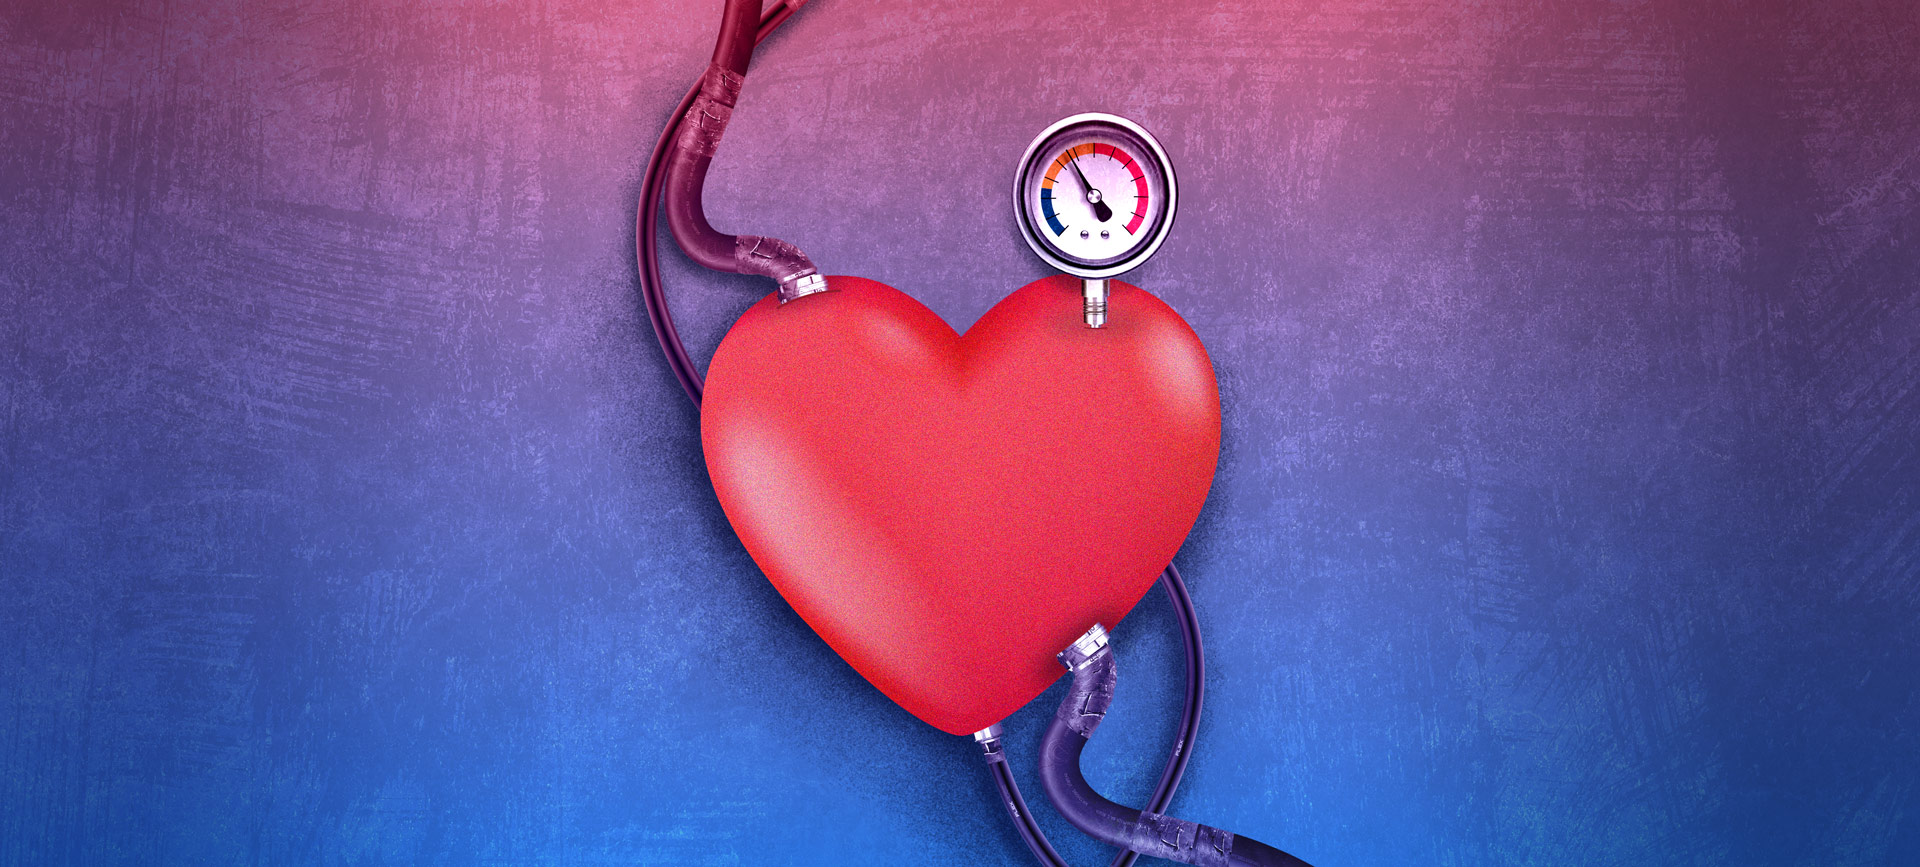 red heart with tubes coming out of it and a pressure gauge on top on a blue background